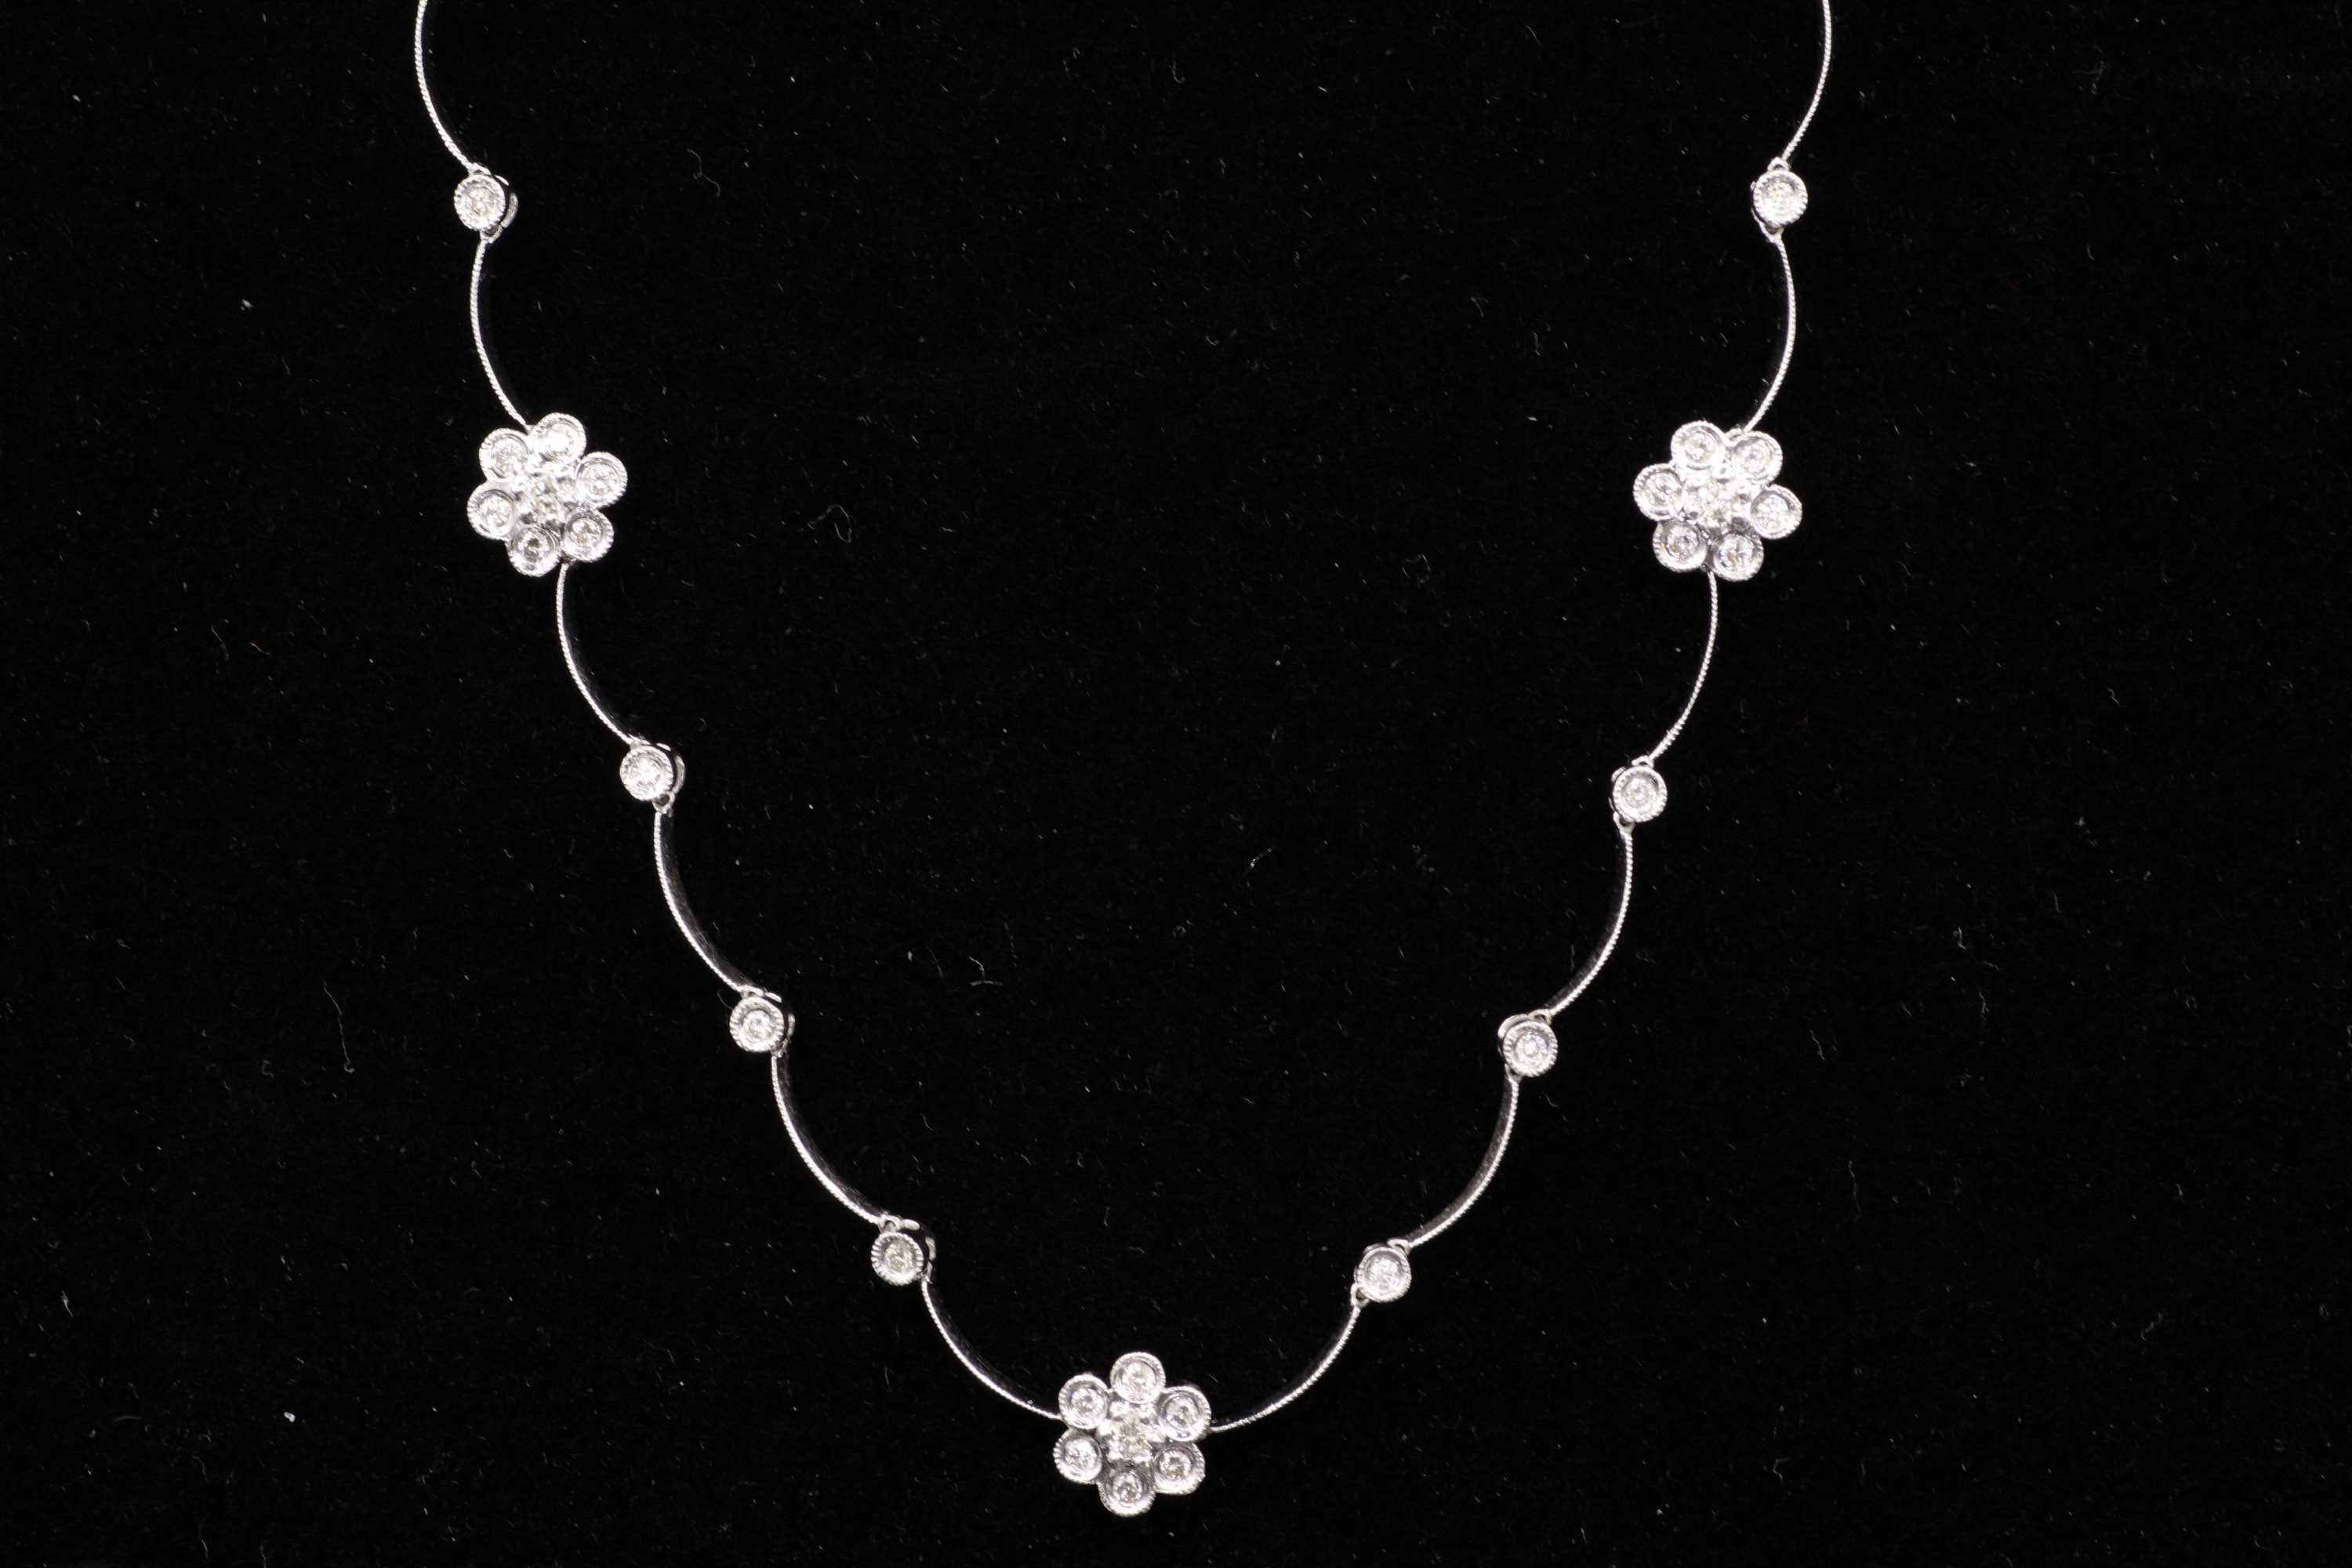 Ladies 14k White Gold Diamond Flower Necklace and Earring Set